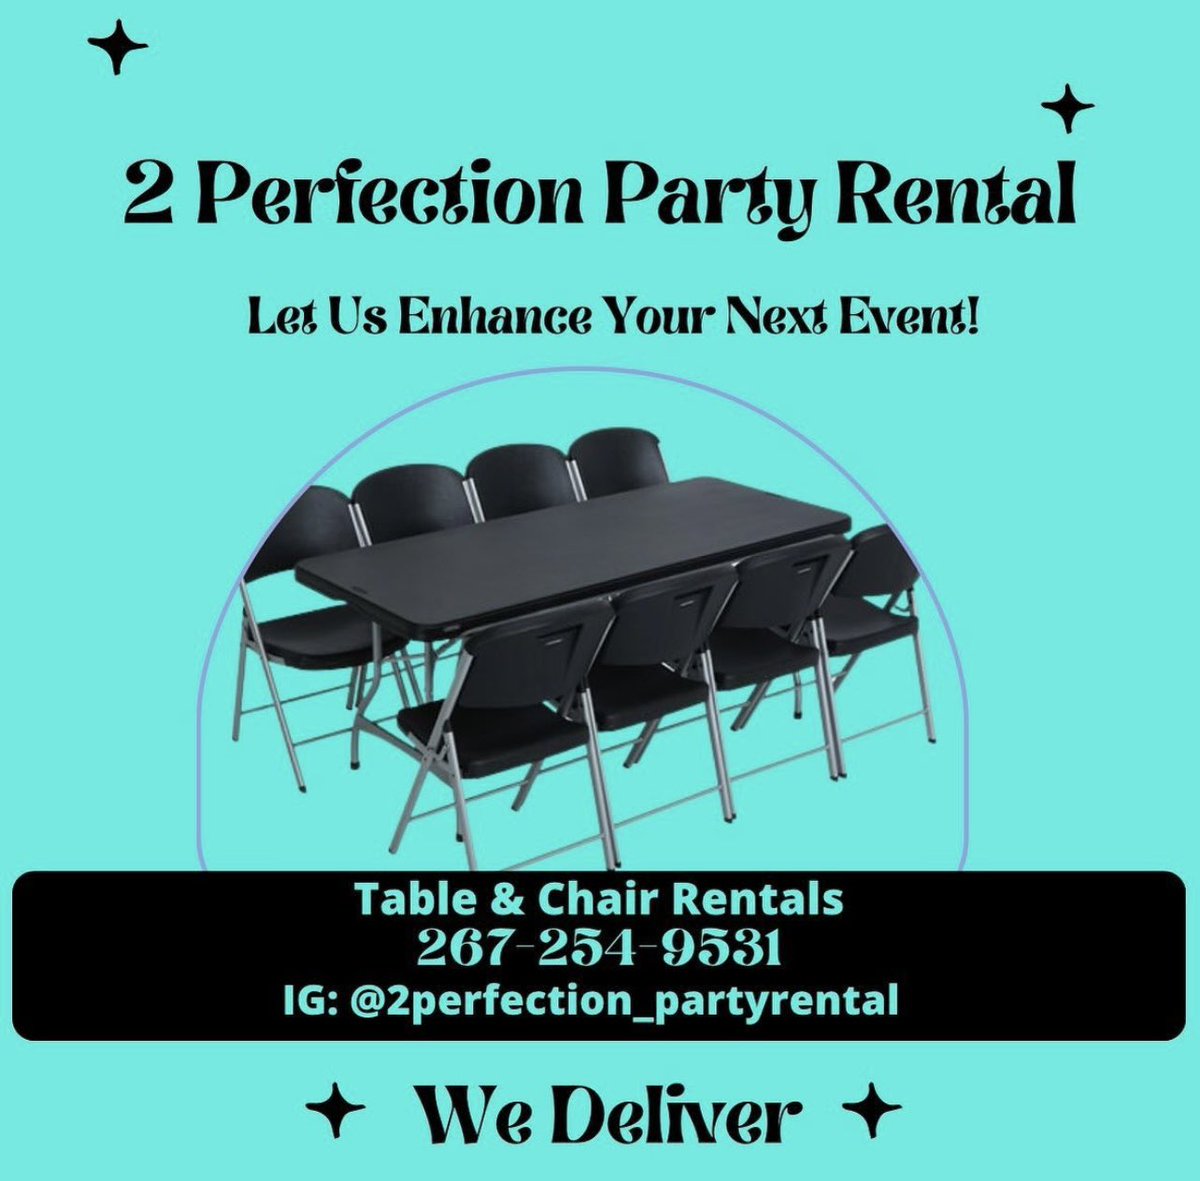 Rent our tables and chairs for your upcoming events #prom #promsendoff #graduation #graduationparty #partyrental #tableandchairs #table #chair #tablerentals #chairrentals #events #popupshop #birthdayparty #genderreveal #babyshower #corporateevents #bookwithme #philly